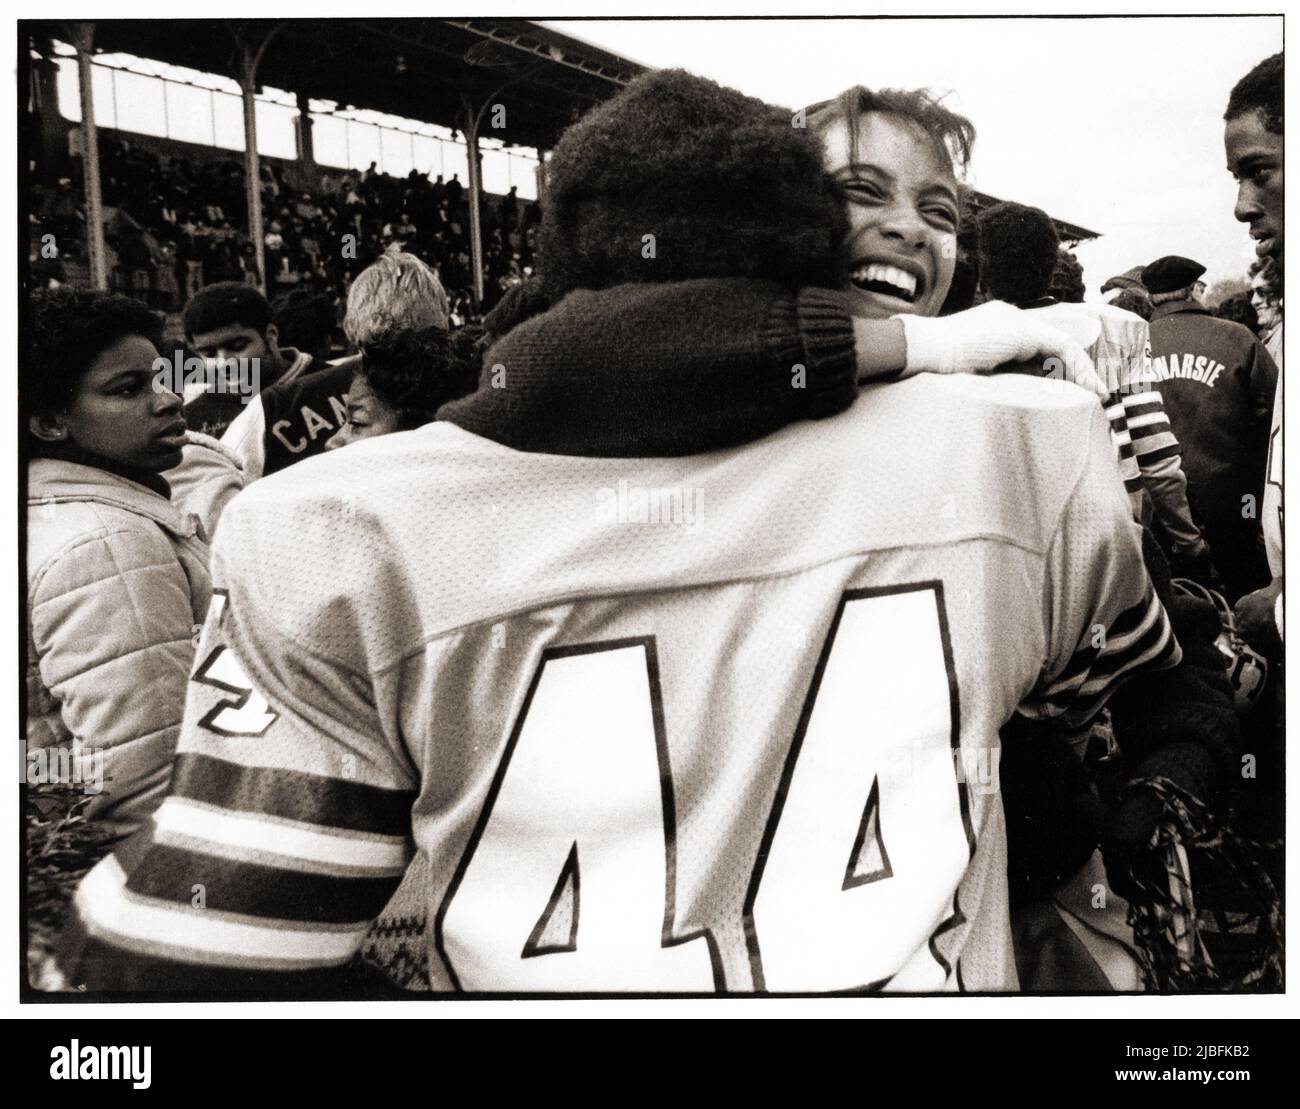 After a game, Canarsie High School football player gets hugged by a jubilant cheerleader. At Midwood Field in Brooklyn, New York. Stock Photo